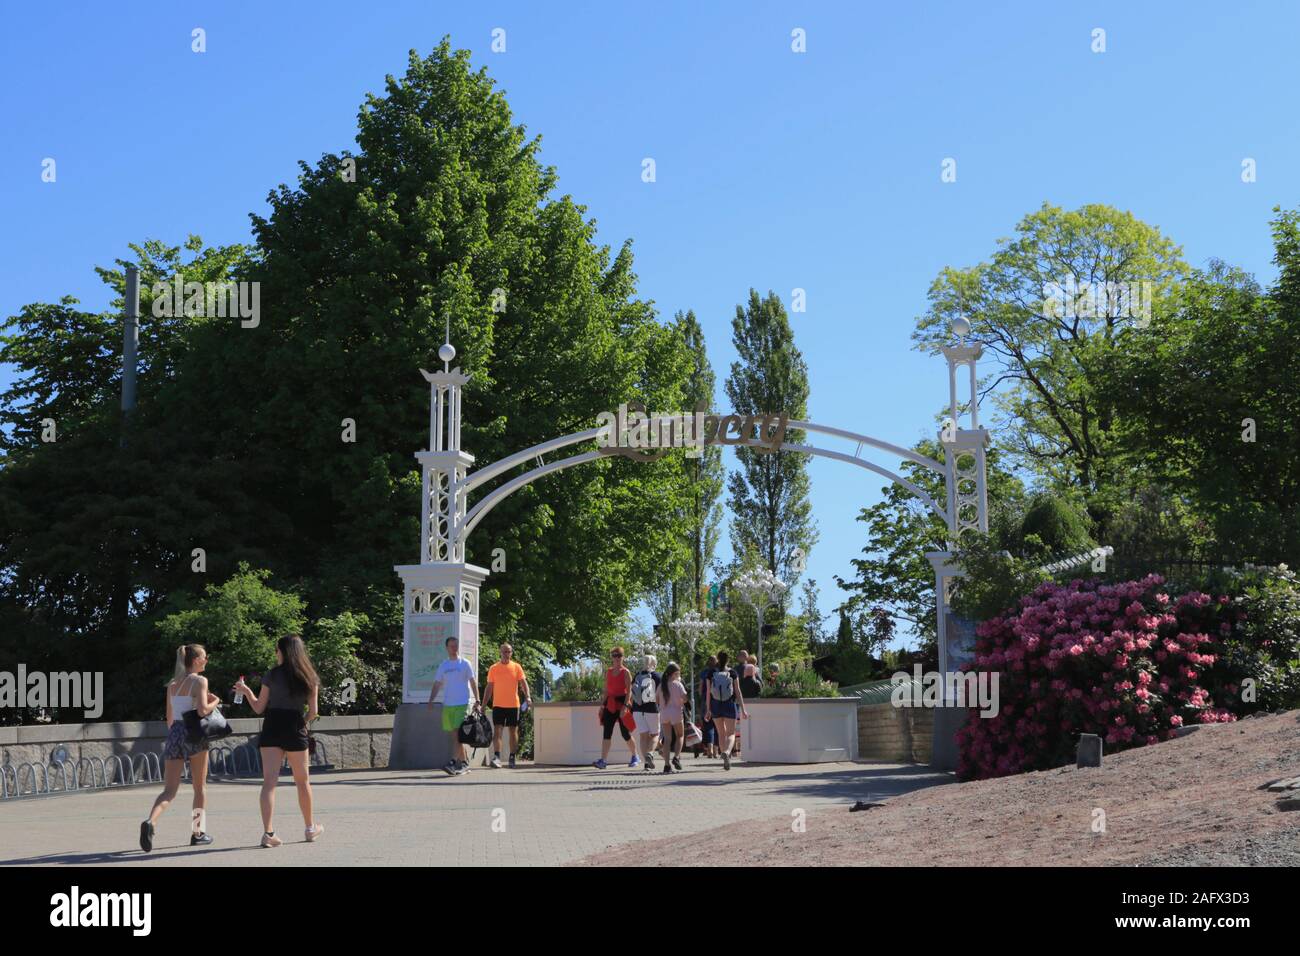 People walk along the promenade to the entrance and exit of Liseberg amusement park in Gothenburg city centre, Sweden, during the summer. Stock Photo